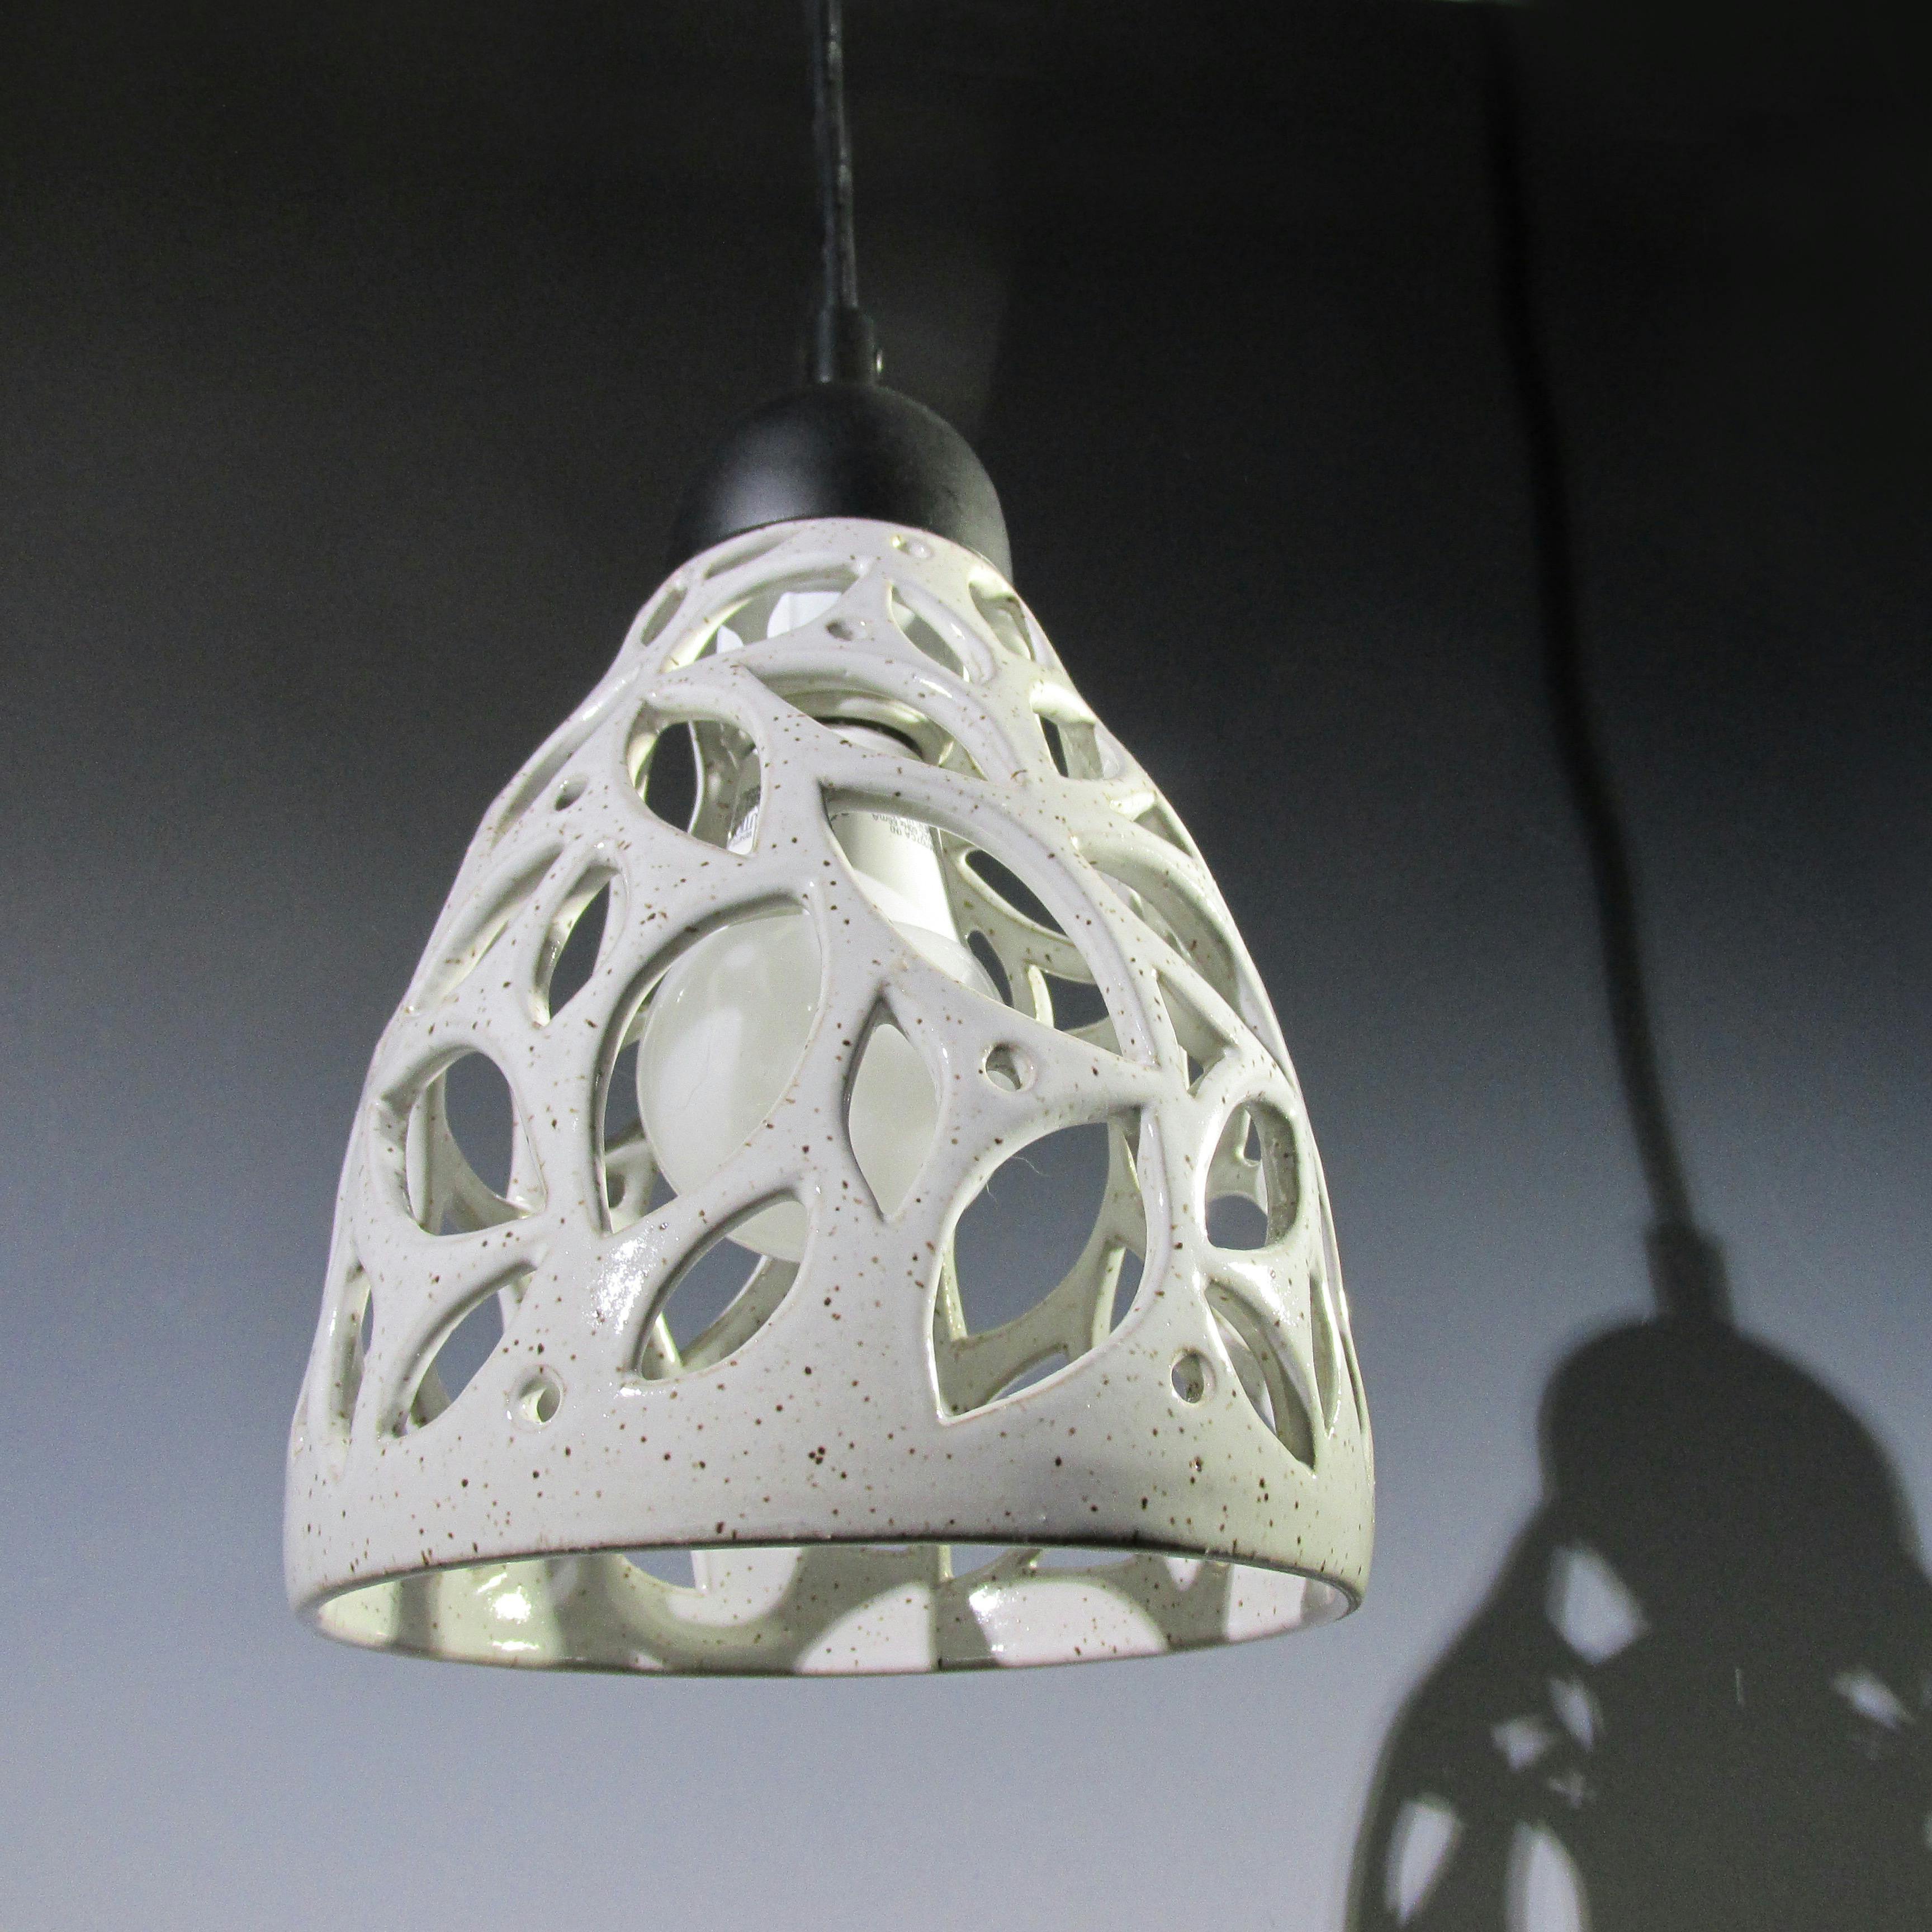 ceramic light ficture with leaf like openings for light to shine through